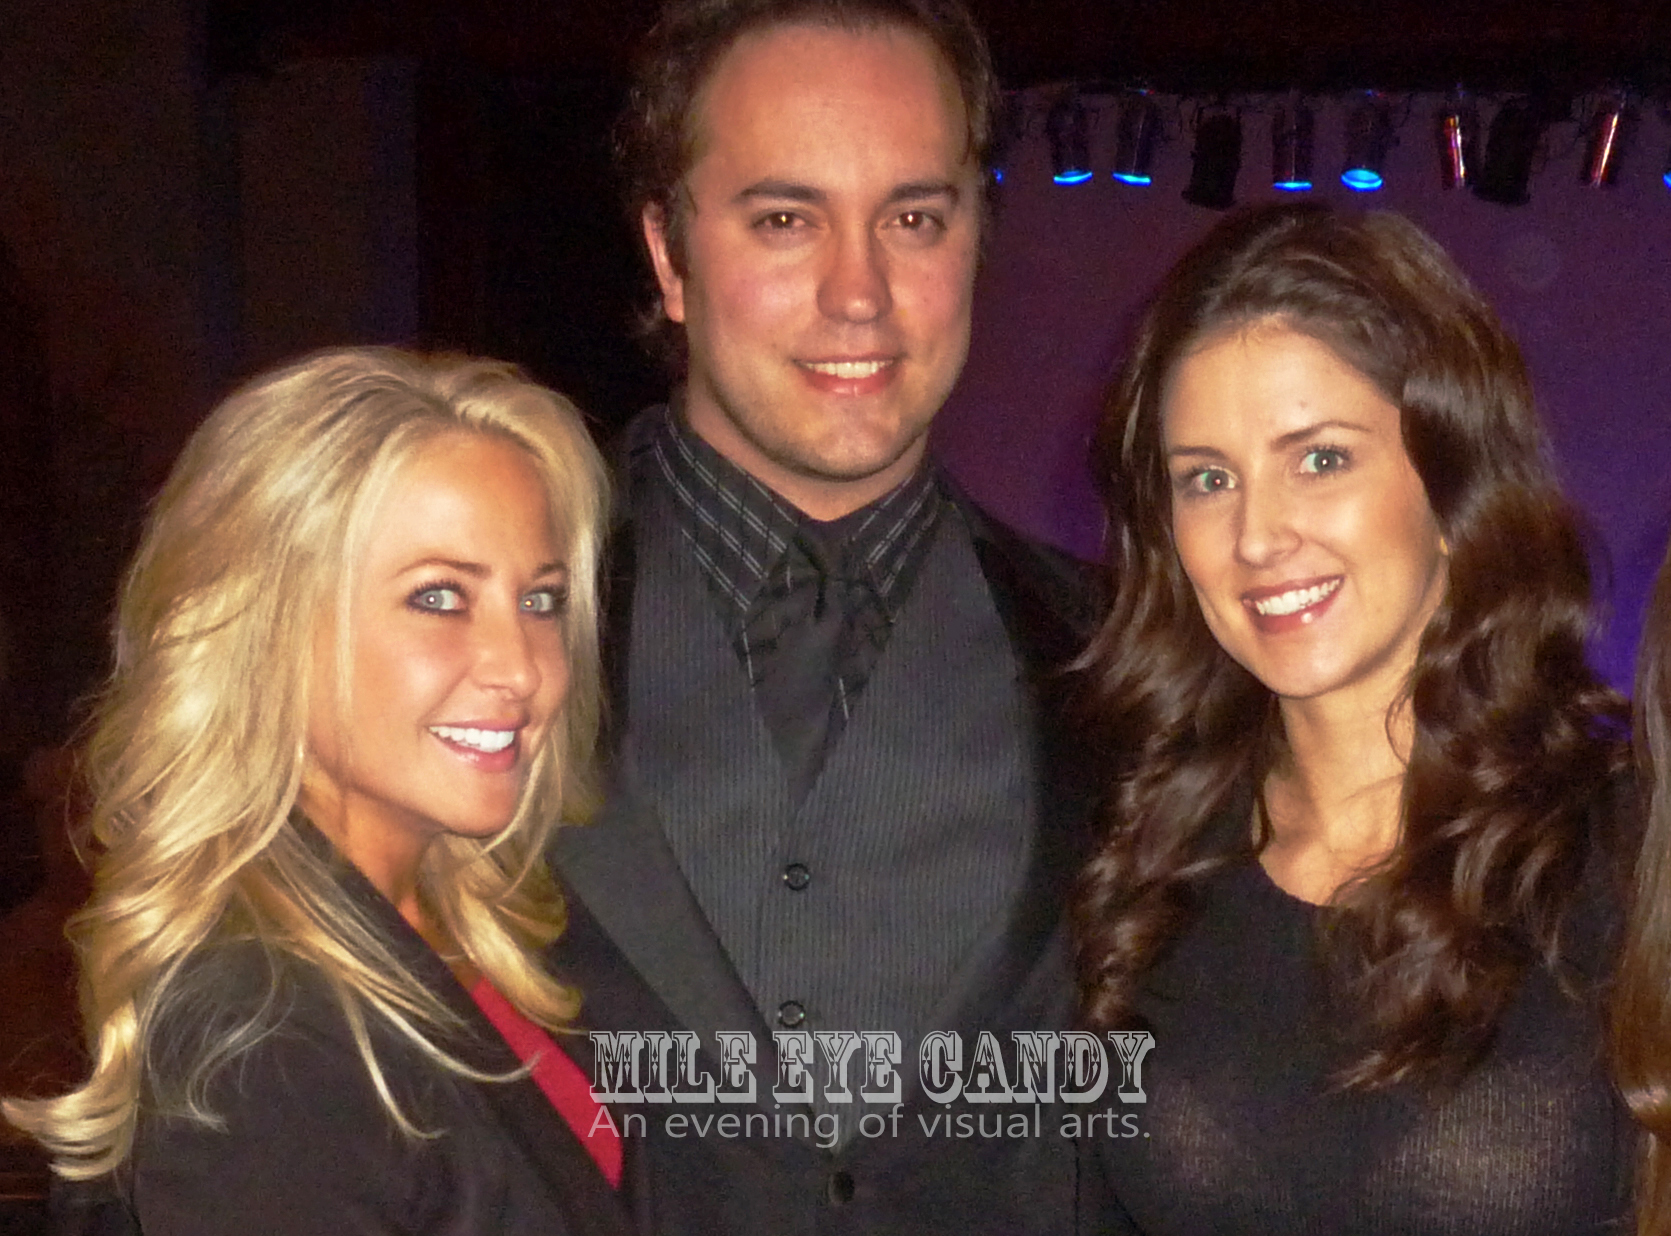 Actress's Emily Absher and Morgan Weaver with Jimmy Drain at Mile Eye Candy: An evening of visual arts sponsored by Ghostblade Productions LLC